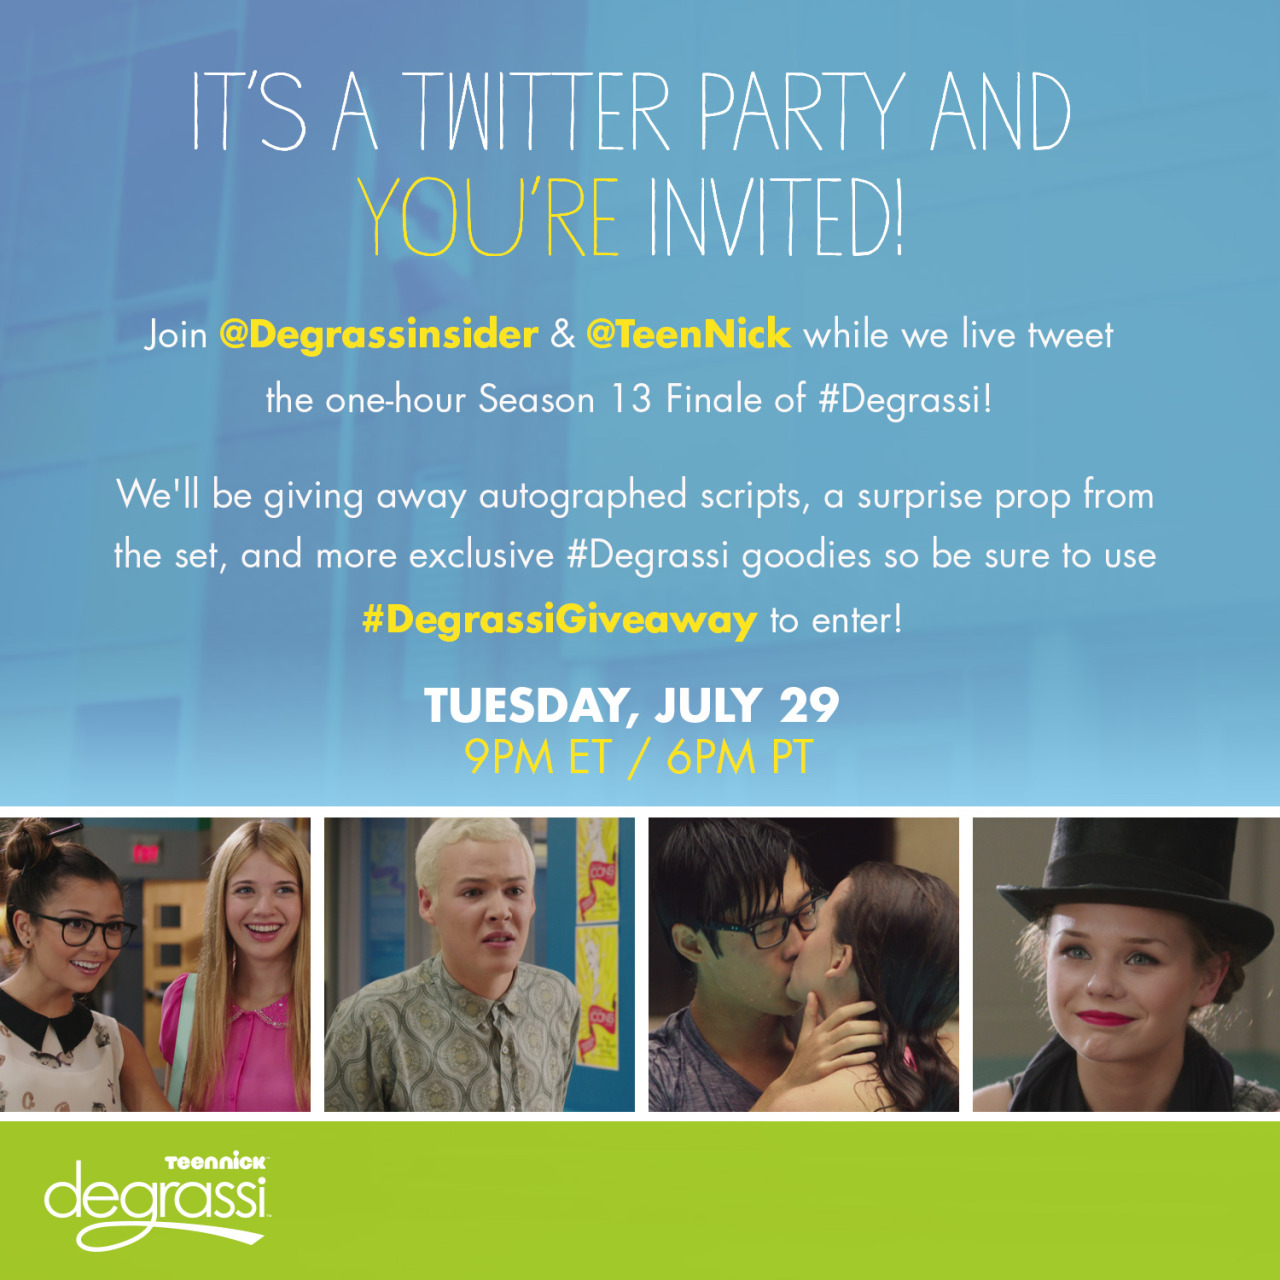 “Degrassi Twitter Party Sweepstakes”
Sponsored by Viacom Media Networks, a division of Viacom International Inc.
1. NO PURCHASE NECESSARY TO ENTER OR WIN A PRIZE. A PURCHASE WILL NOT INCREASE YOUR CHANCES OF WINNING. VOID WHERE PROHIBITED OR...